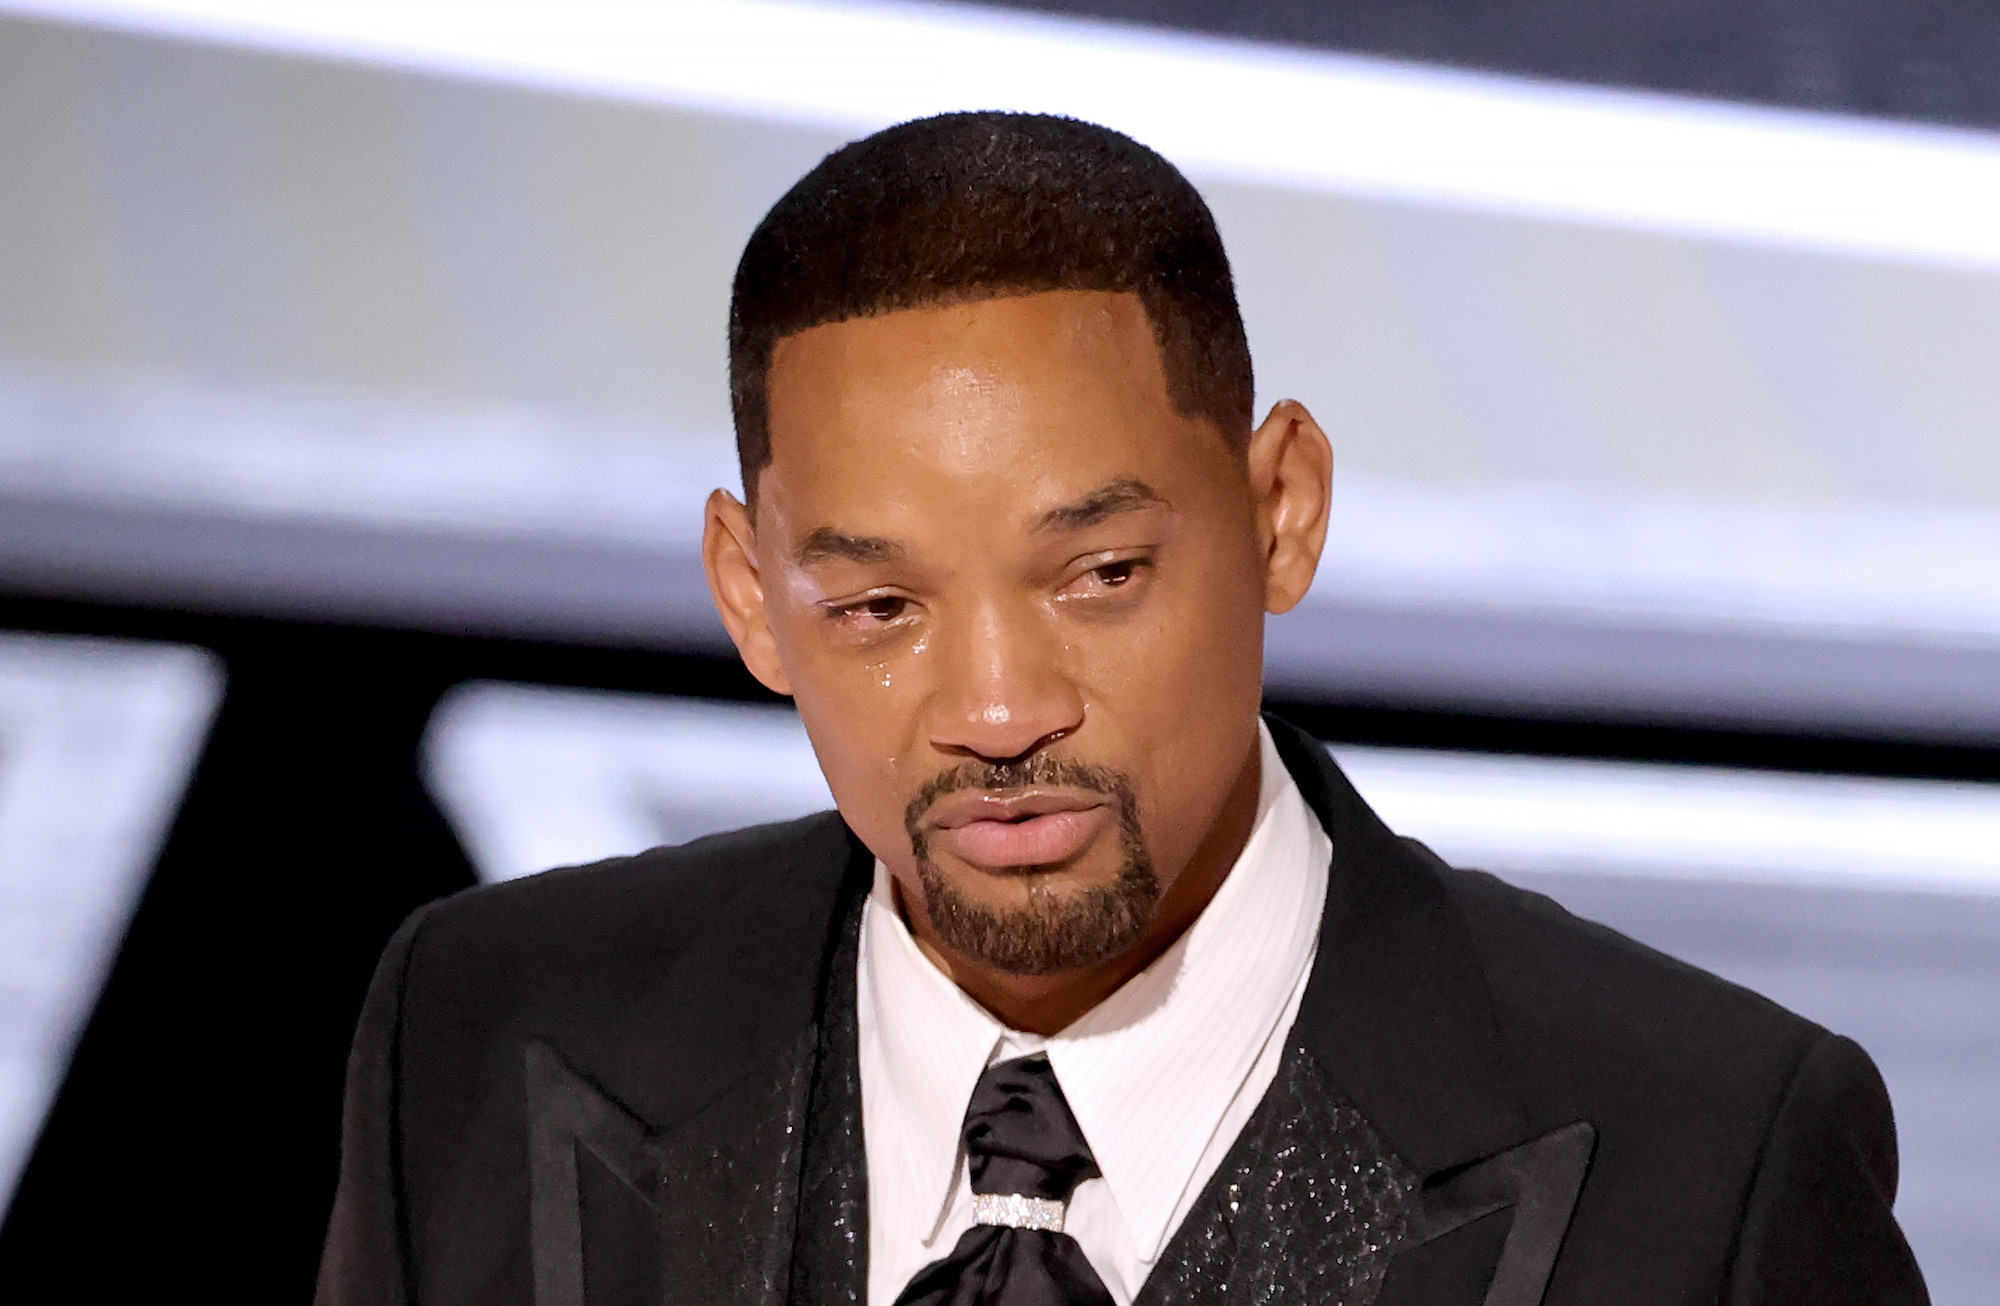 Will Smith, in tears during his Best Actor acceptance speech, slapped Chris Rock over a joke about Jada Pinkett-Smith at the 2022 Oscars.